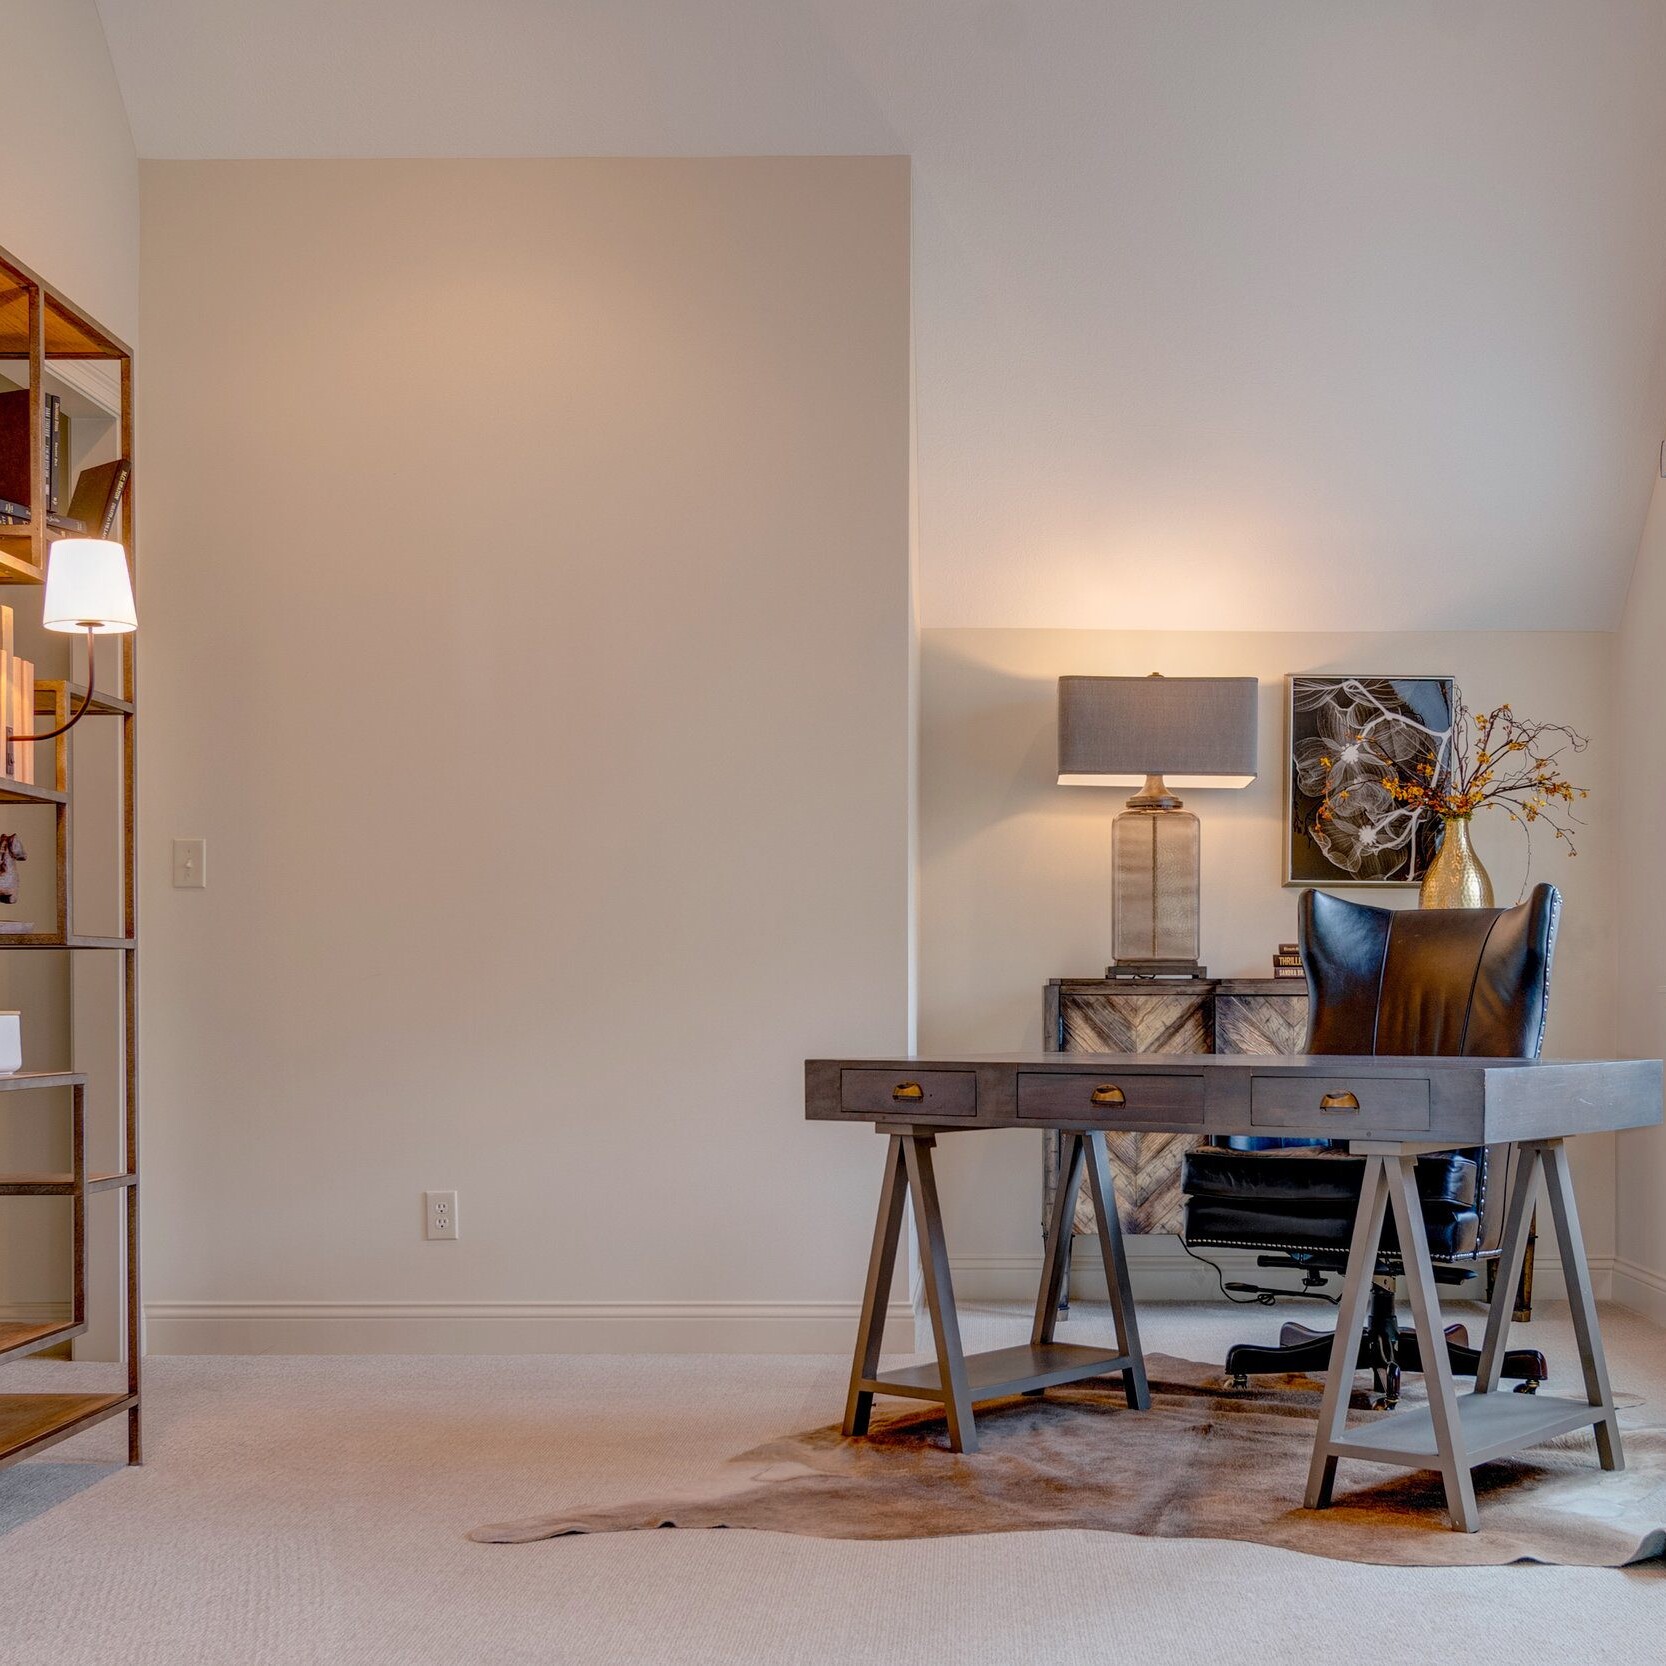 A home office featuring a desk and bookshelves, perfect for remote work or studying.